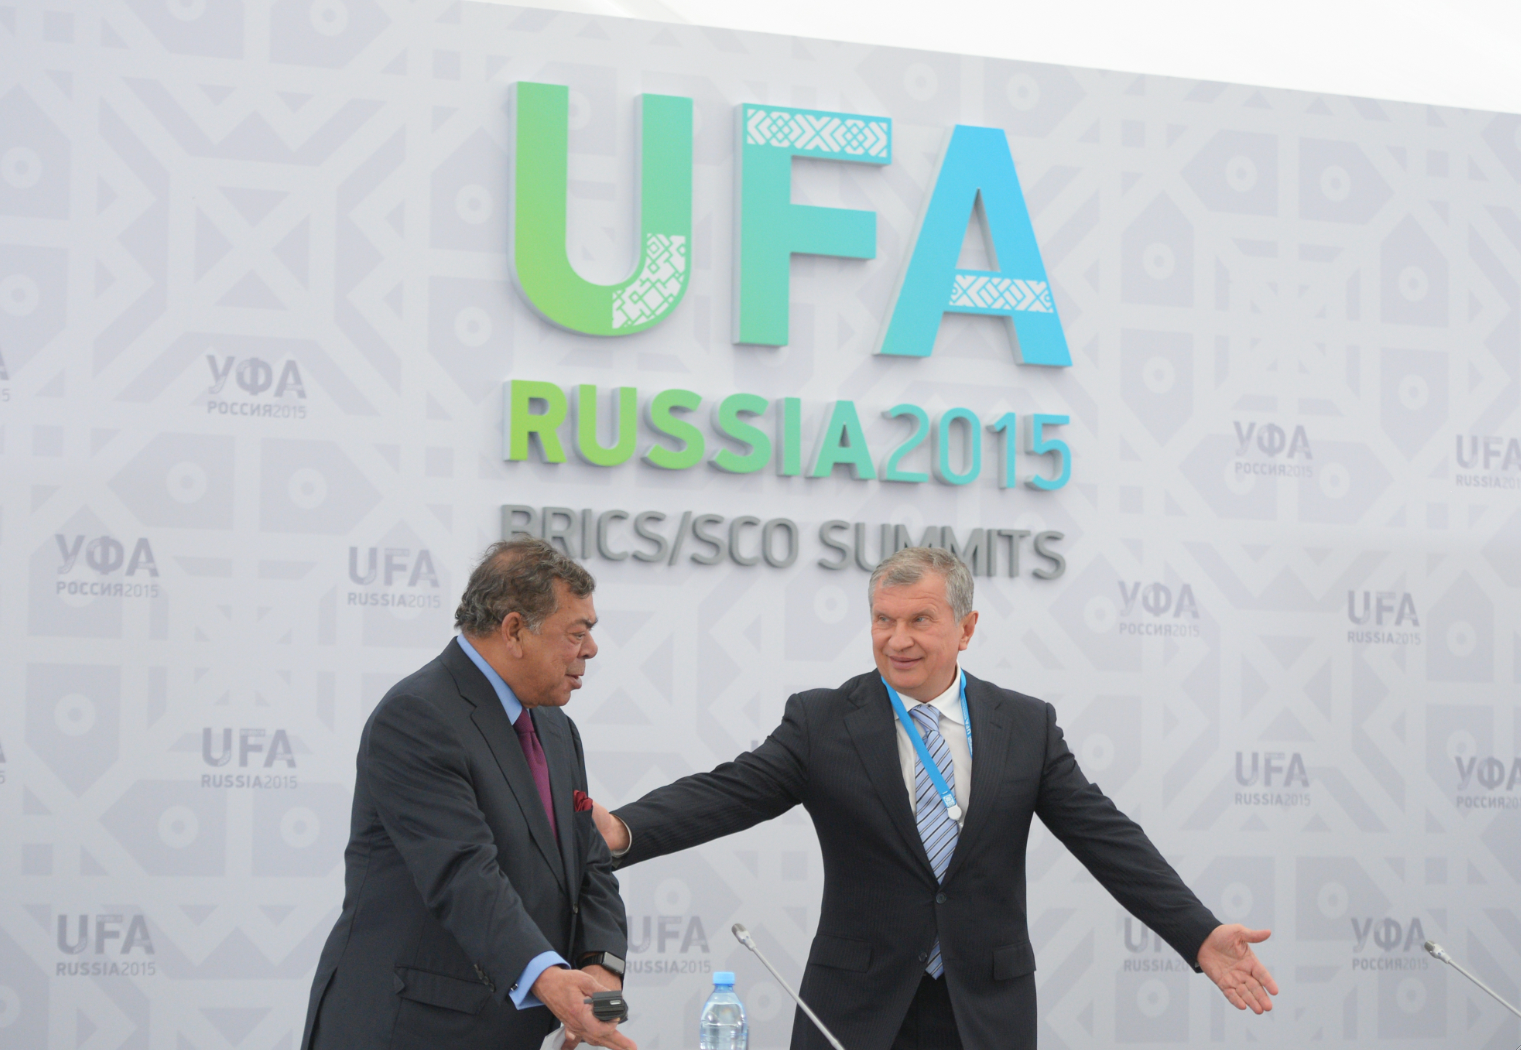 Shashi Ruia, chairman and co-founder of Essar Group, left, and Igor Sechin Rosneft CEO.